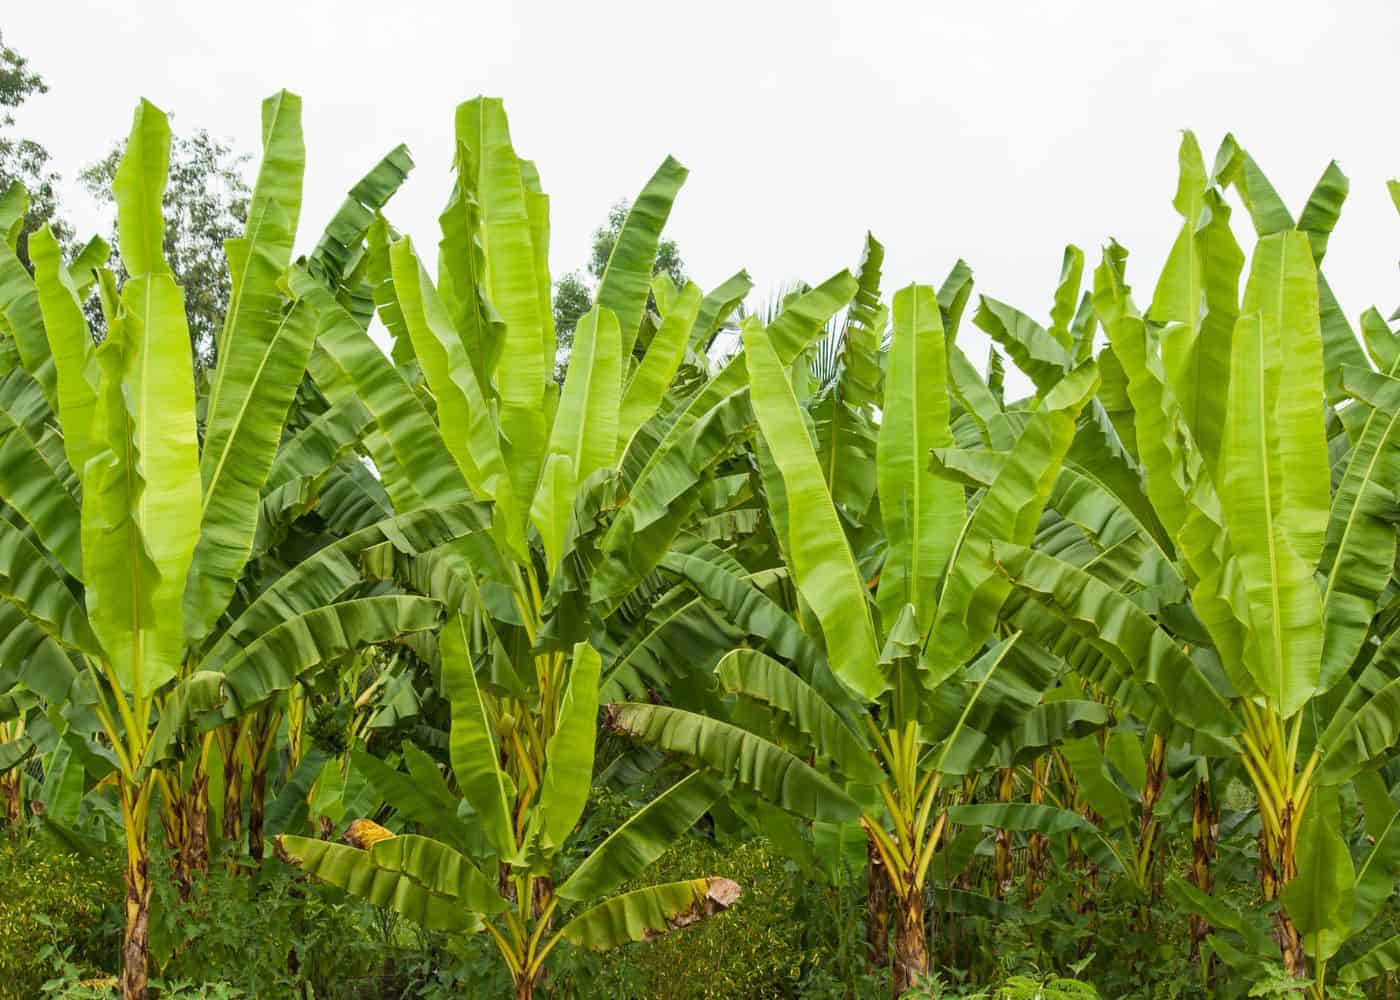 Field of young banana trees